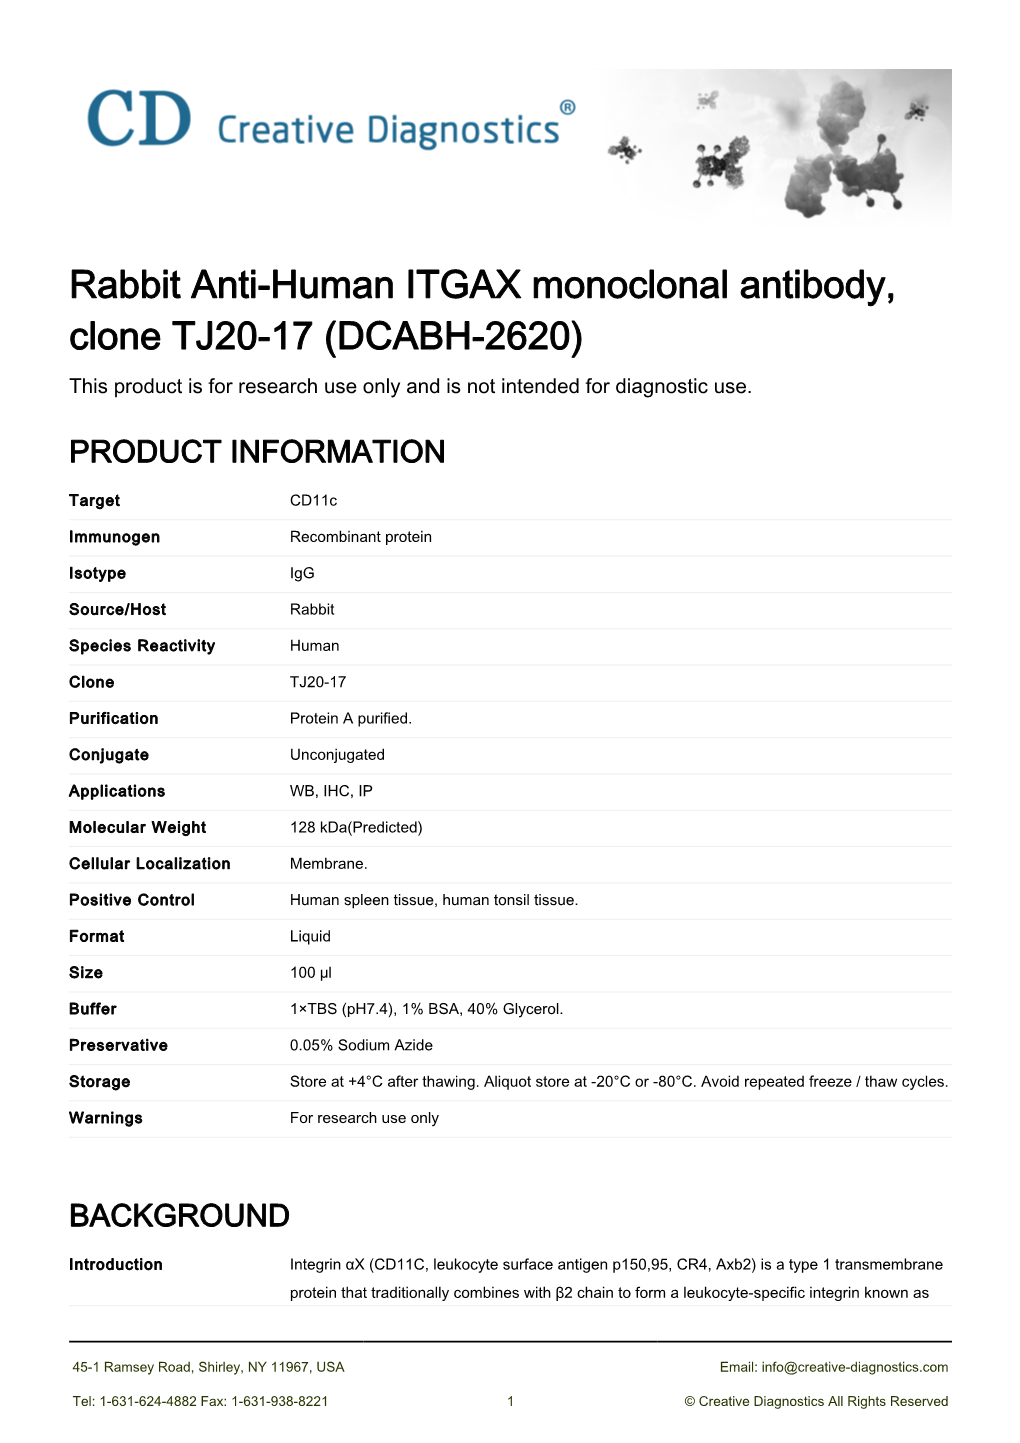 Rabbit Anti-Human ITGAX Monoclonal Antibody, Clone TJ20-17 (DCABH-2620) This Product Is for Research Use Only and Is Not Intended for Diagnostic Use